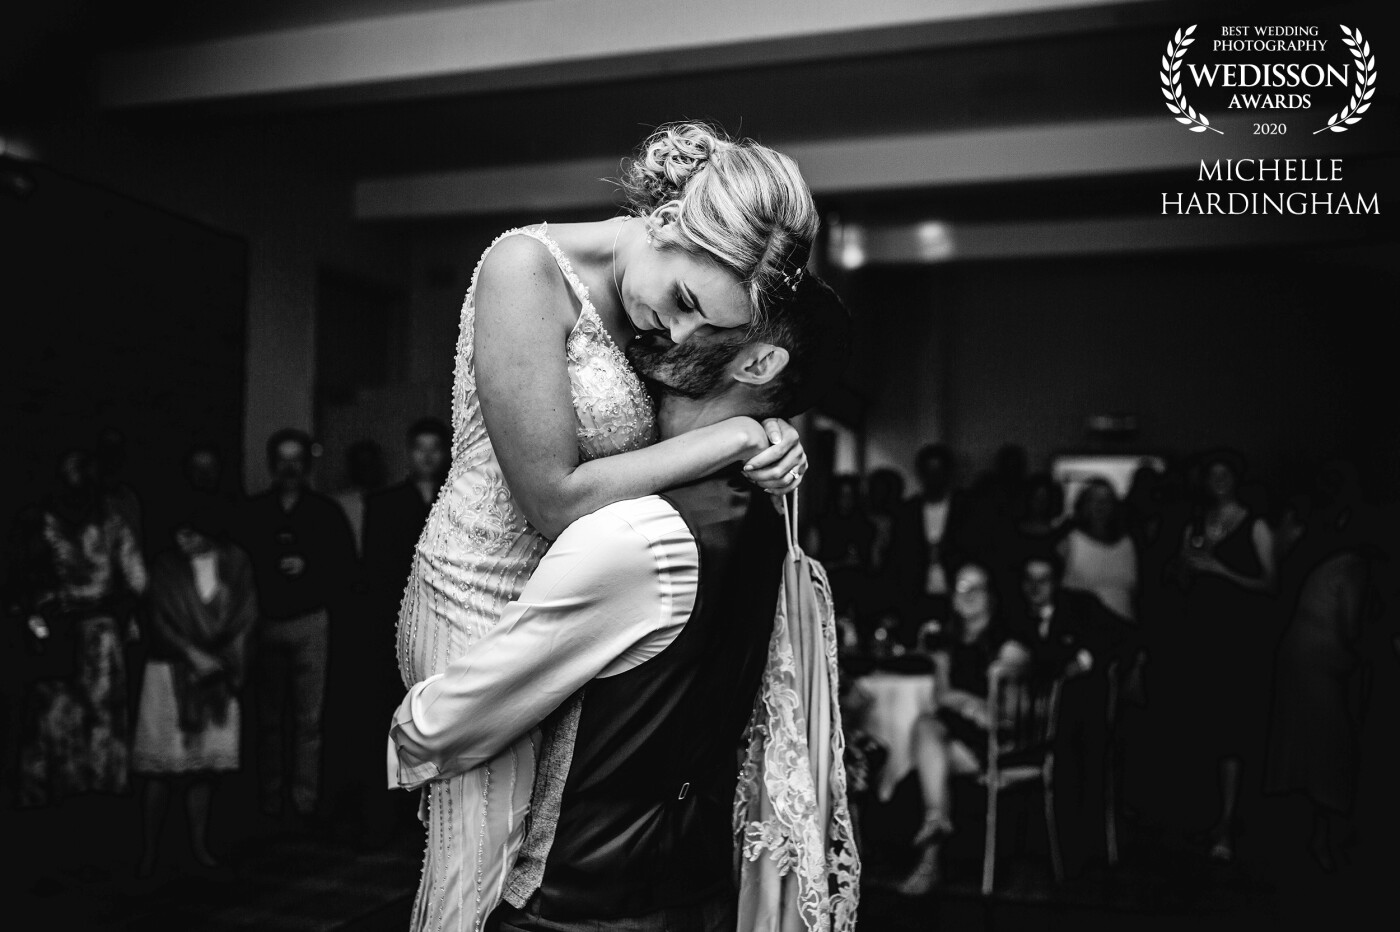 Mr. and Mrs. Beckett, forever lifting each other up. I had the pleasure of photographing the wedding of Vickie and Sam at The William Cecil. What a lovely couple fully in love! 